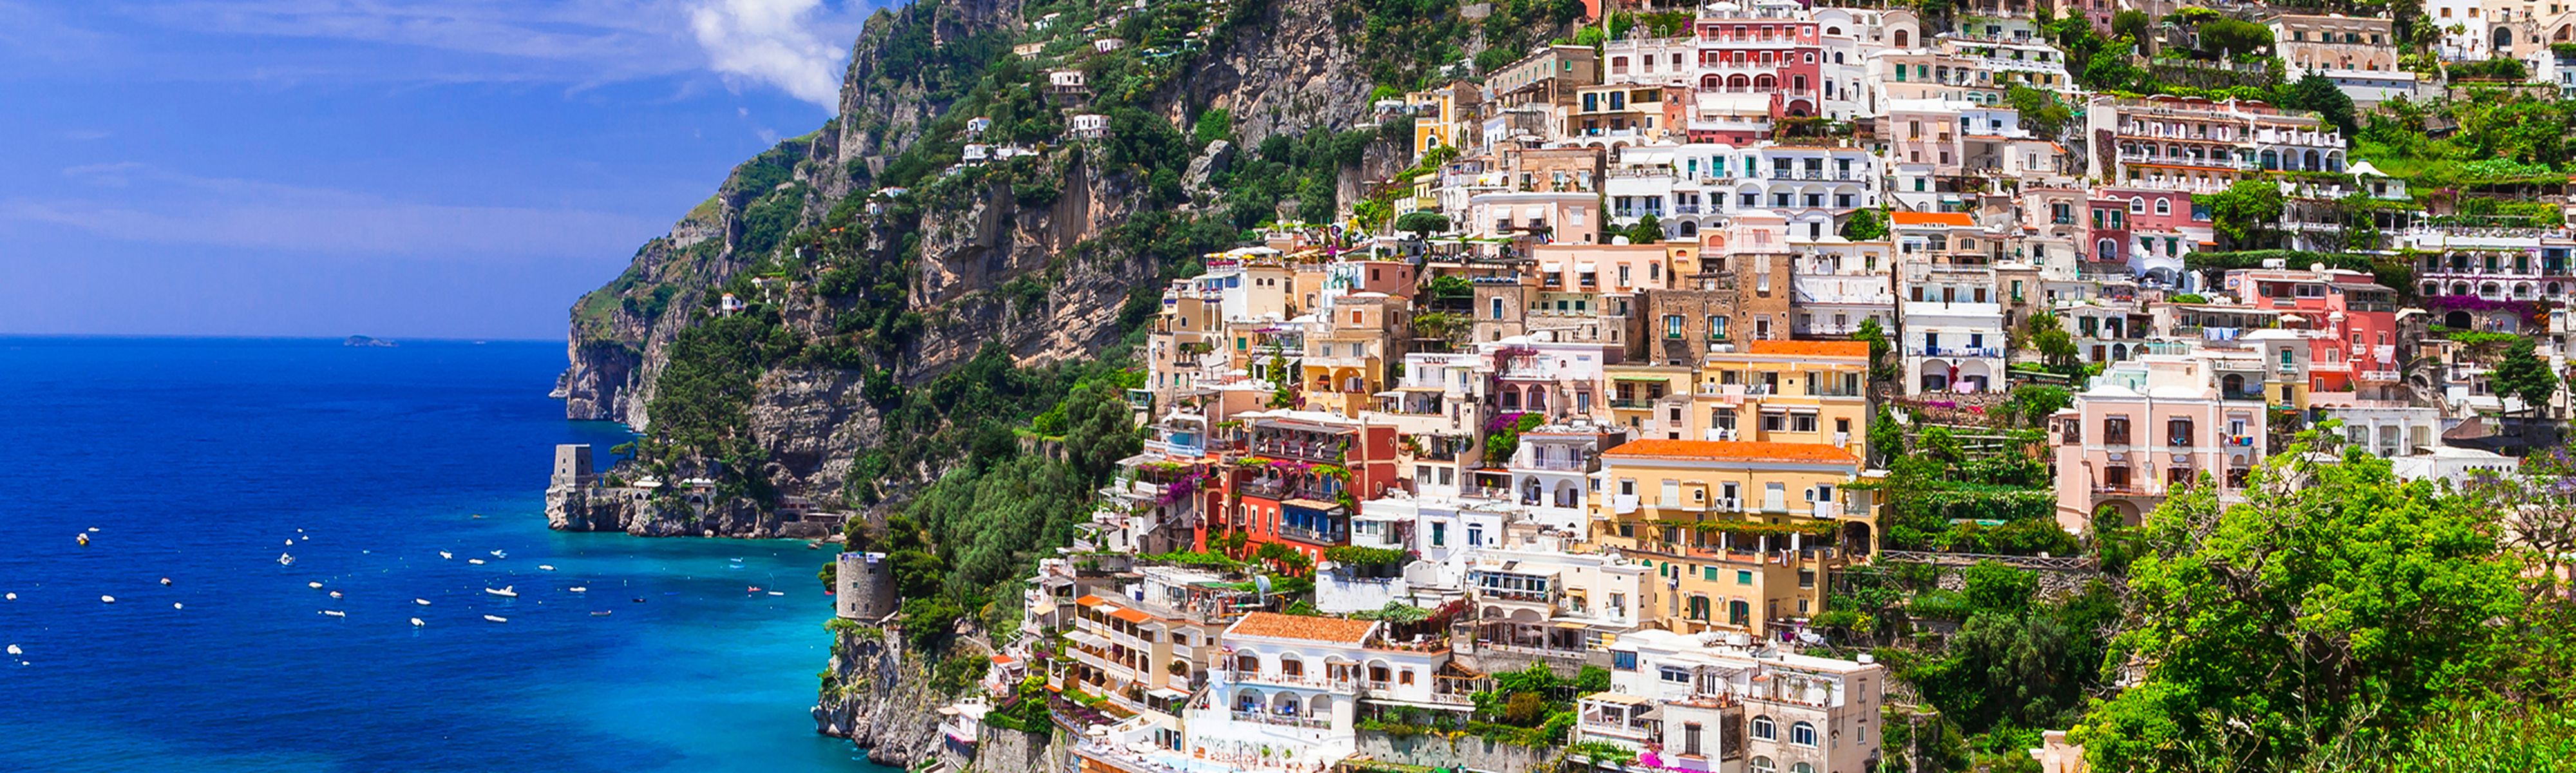 colorful building going up a hill along the amalfi coast in italy